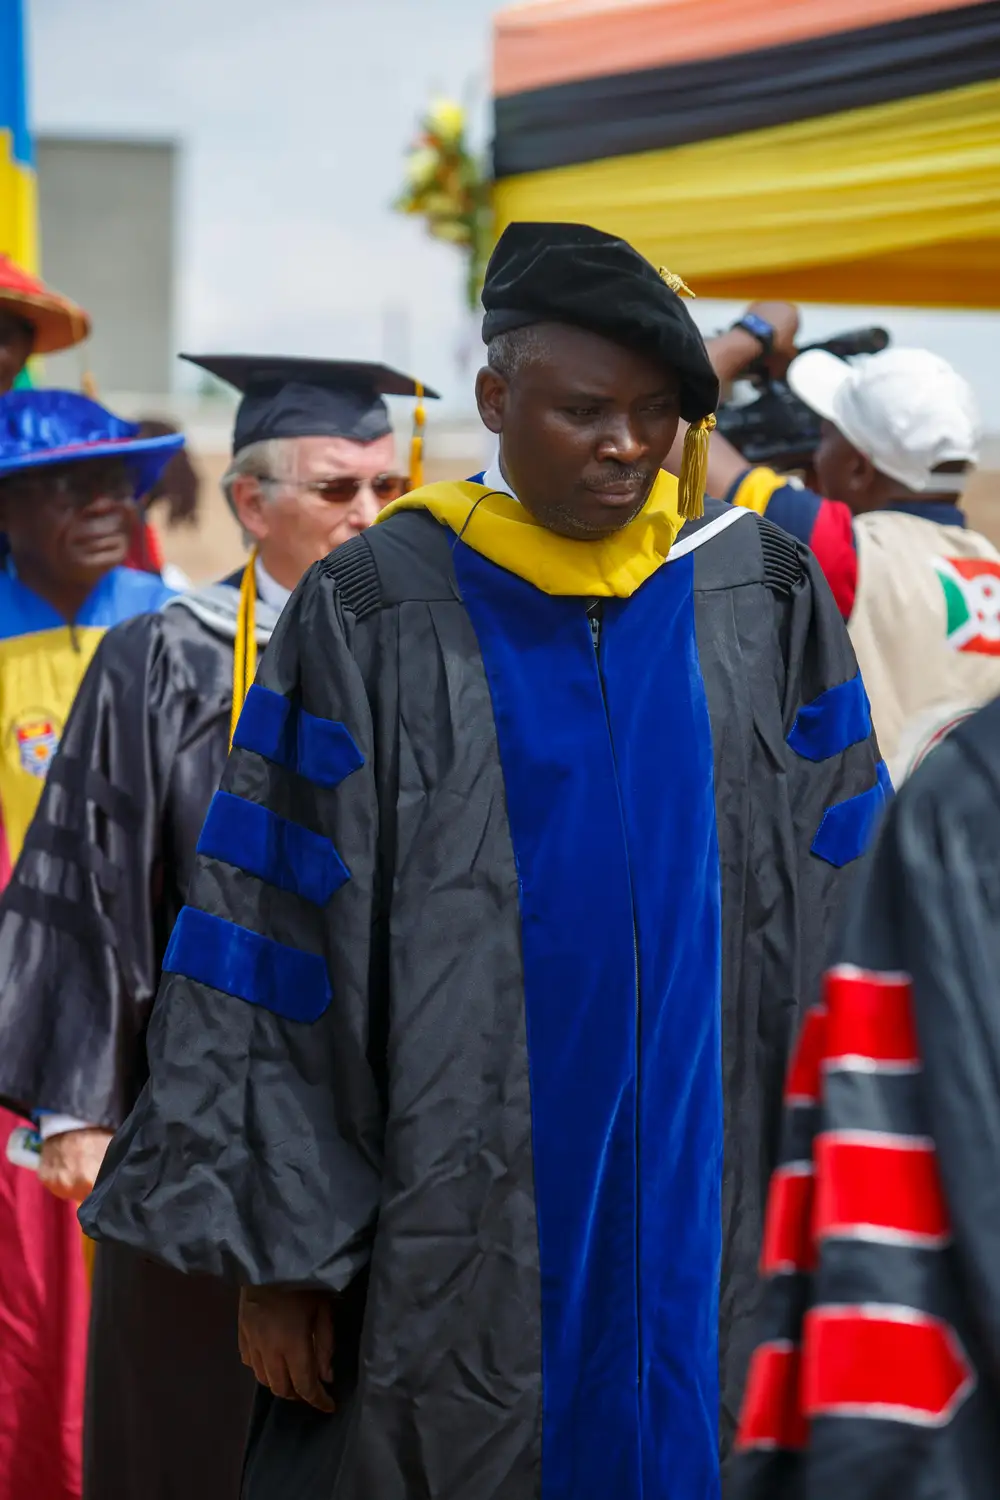 lecturers on ceremonial gowns